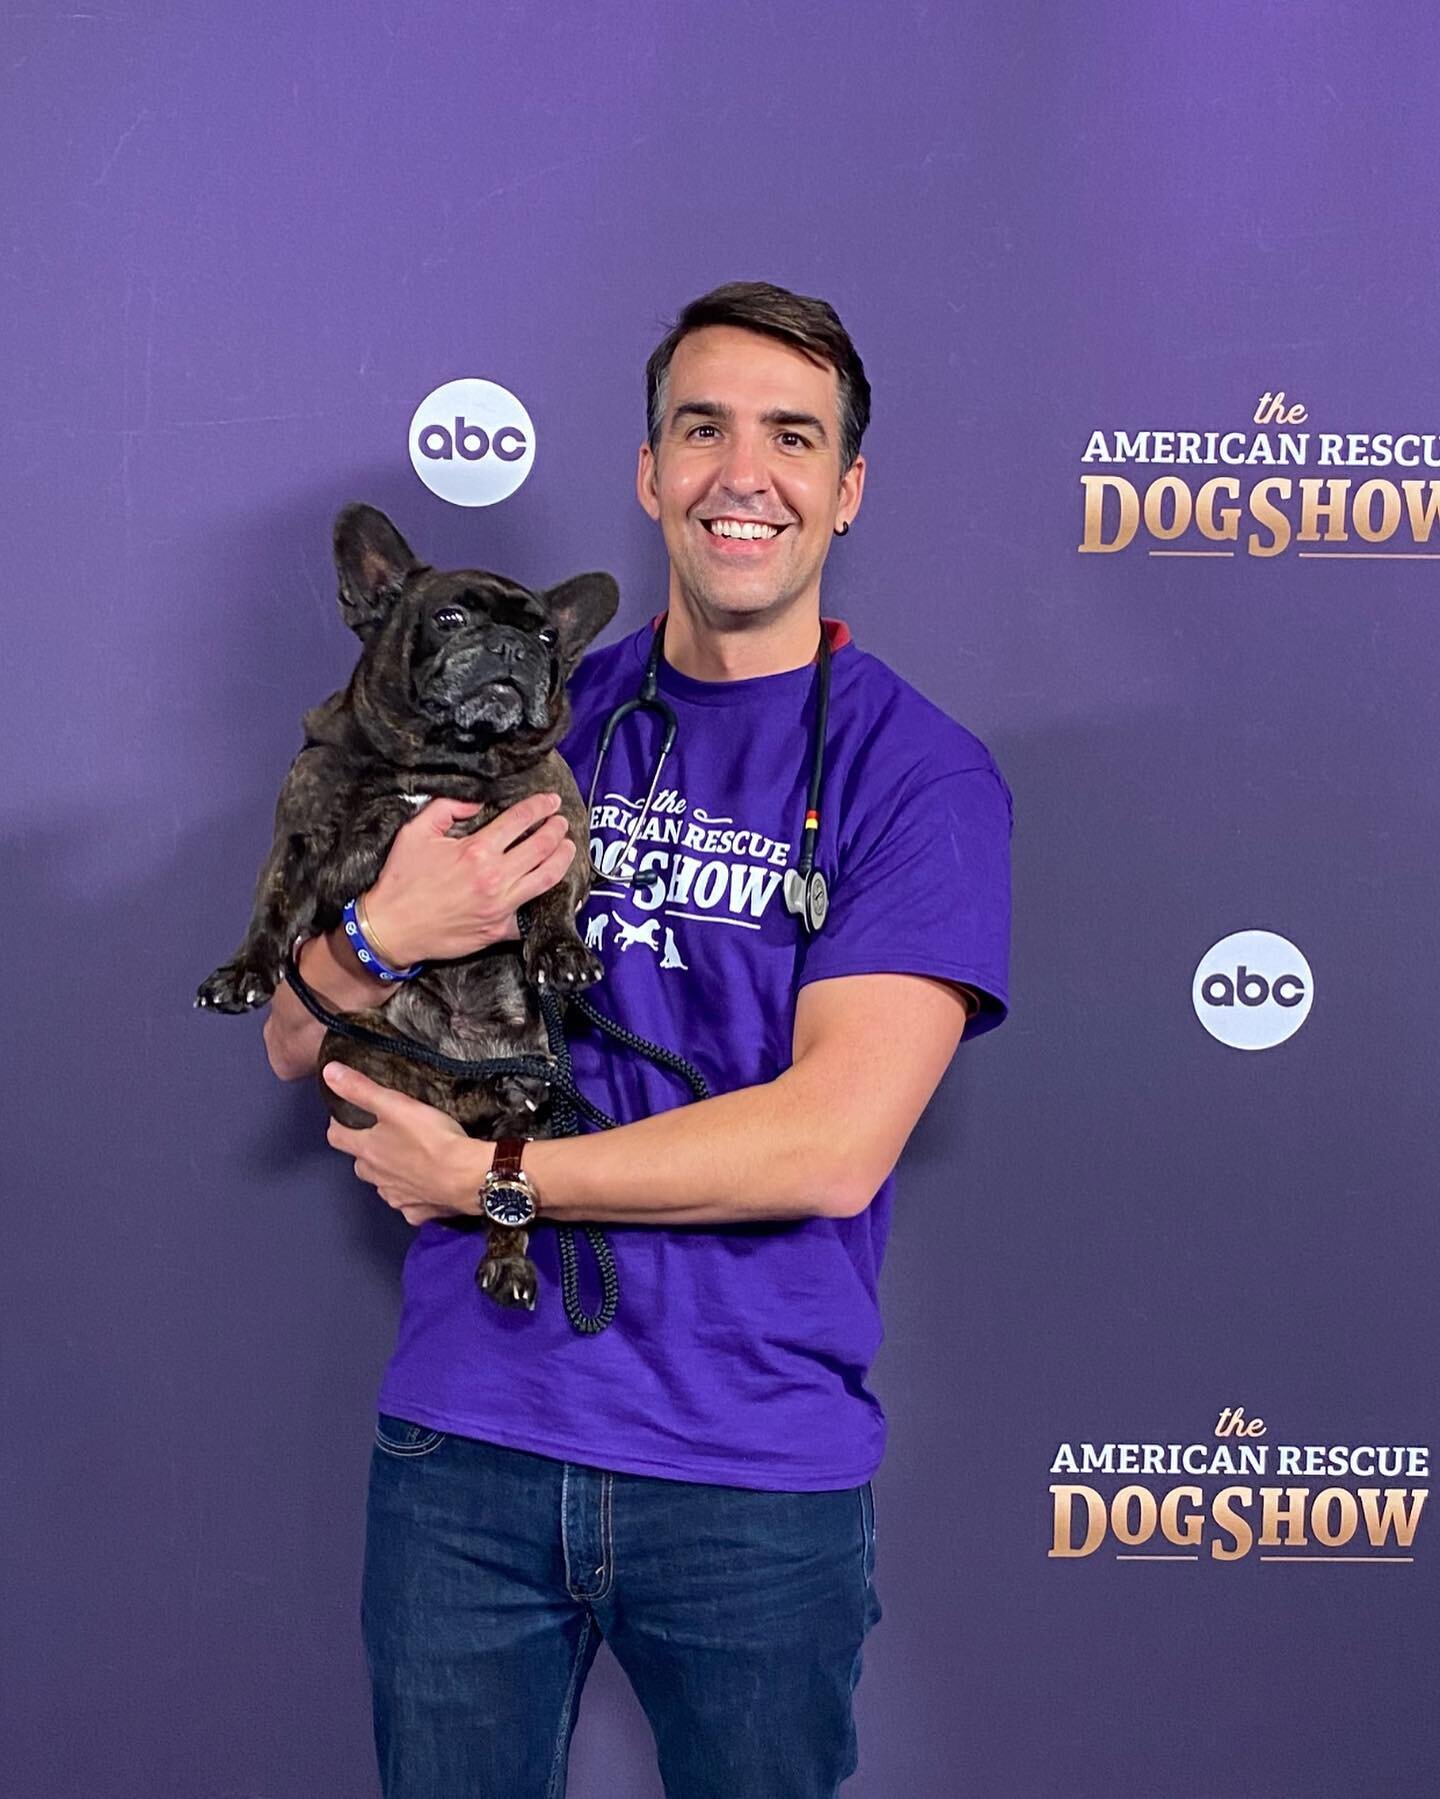 I was excited to be the veterinarian for The American Rescue Dog Show! It is amazing to see these wonderful rescue animals get such great attention. You can watch this fantastic show on @abcnetwork 
.
.
.
.
.
#theamericanrescuedogshow #adoptdontshop 